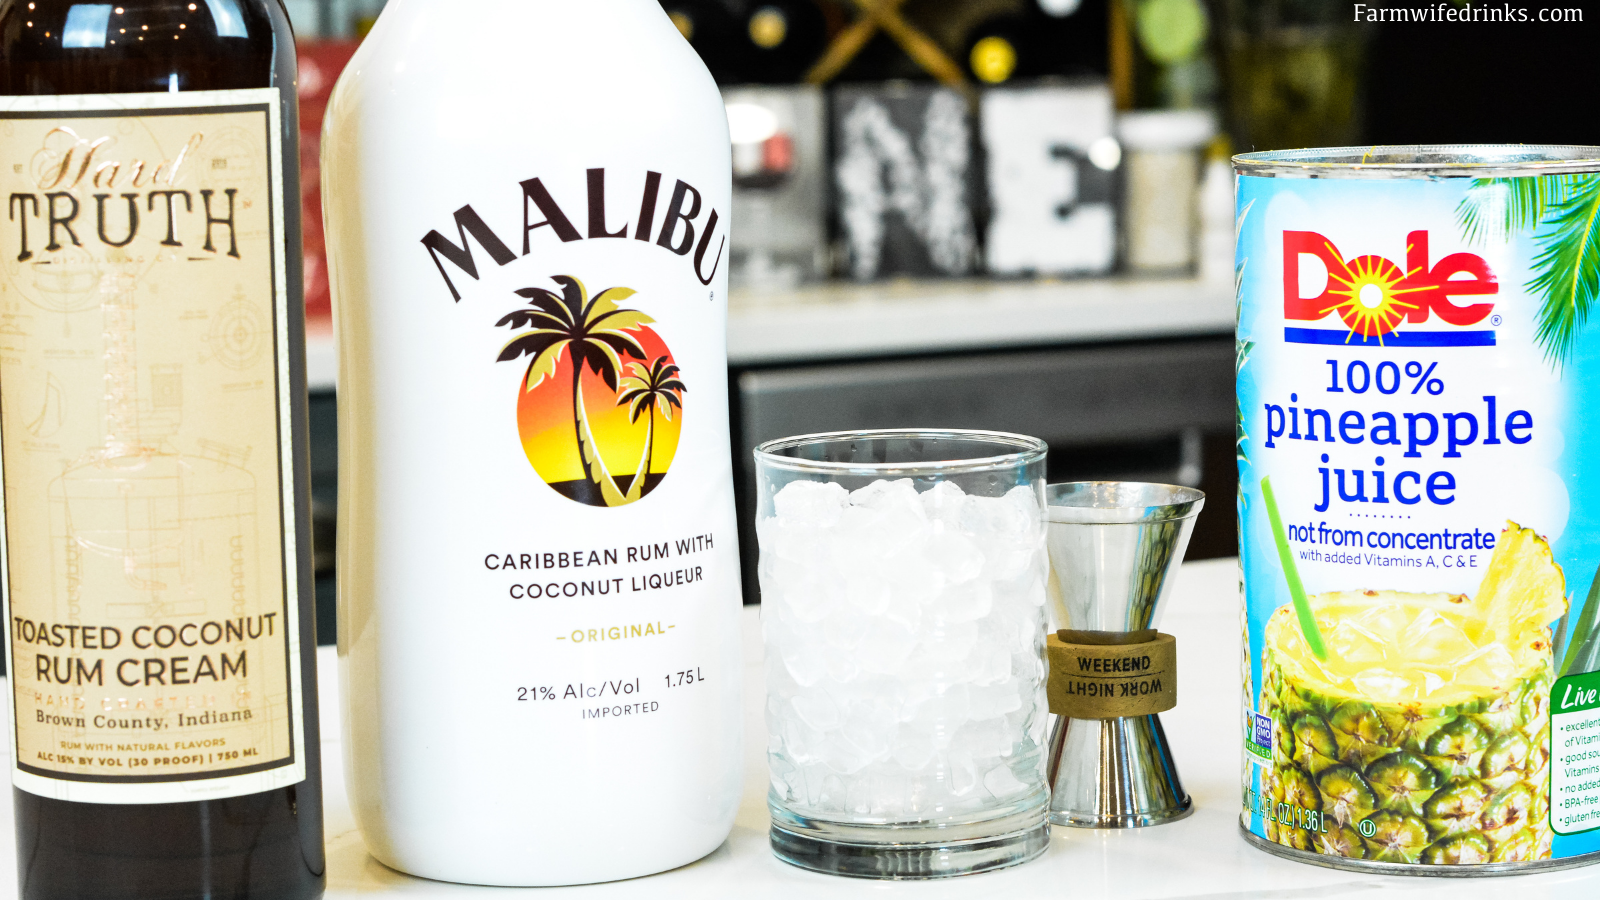 Toasted coconut pineapple cream cocktail is a smooth tropical drink combining Malibu rum and toasted coconut rum creme with pineapple juice. 